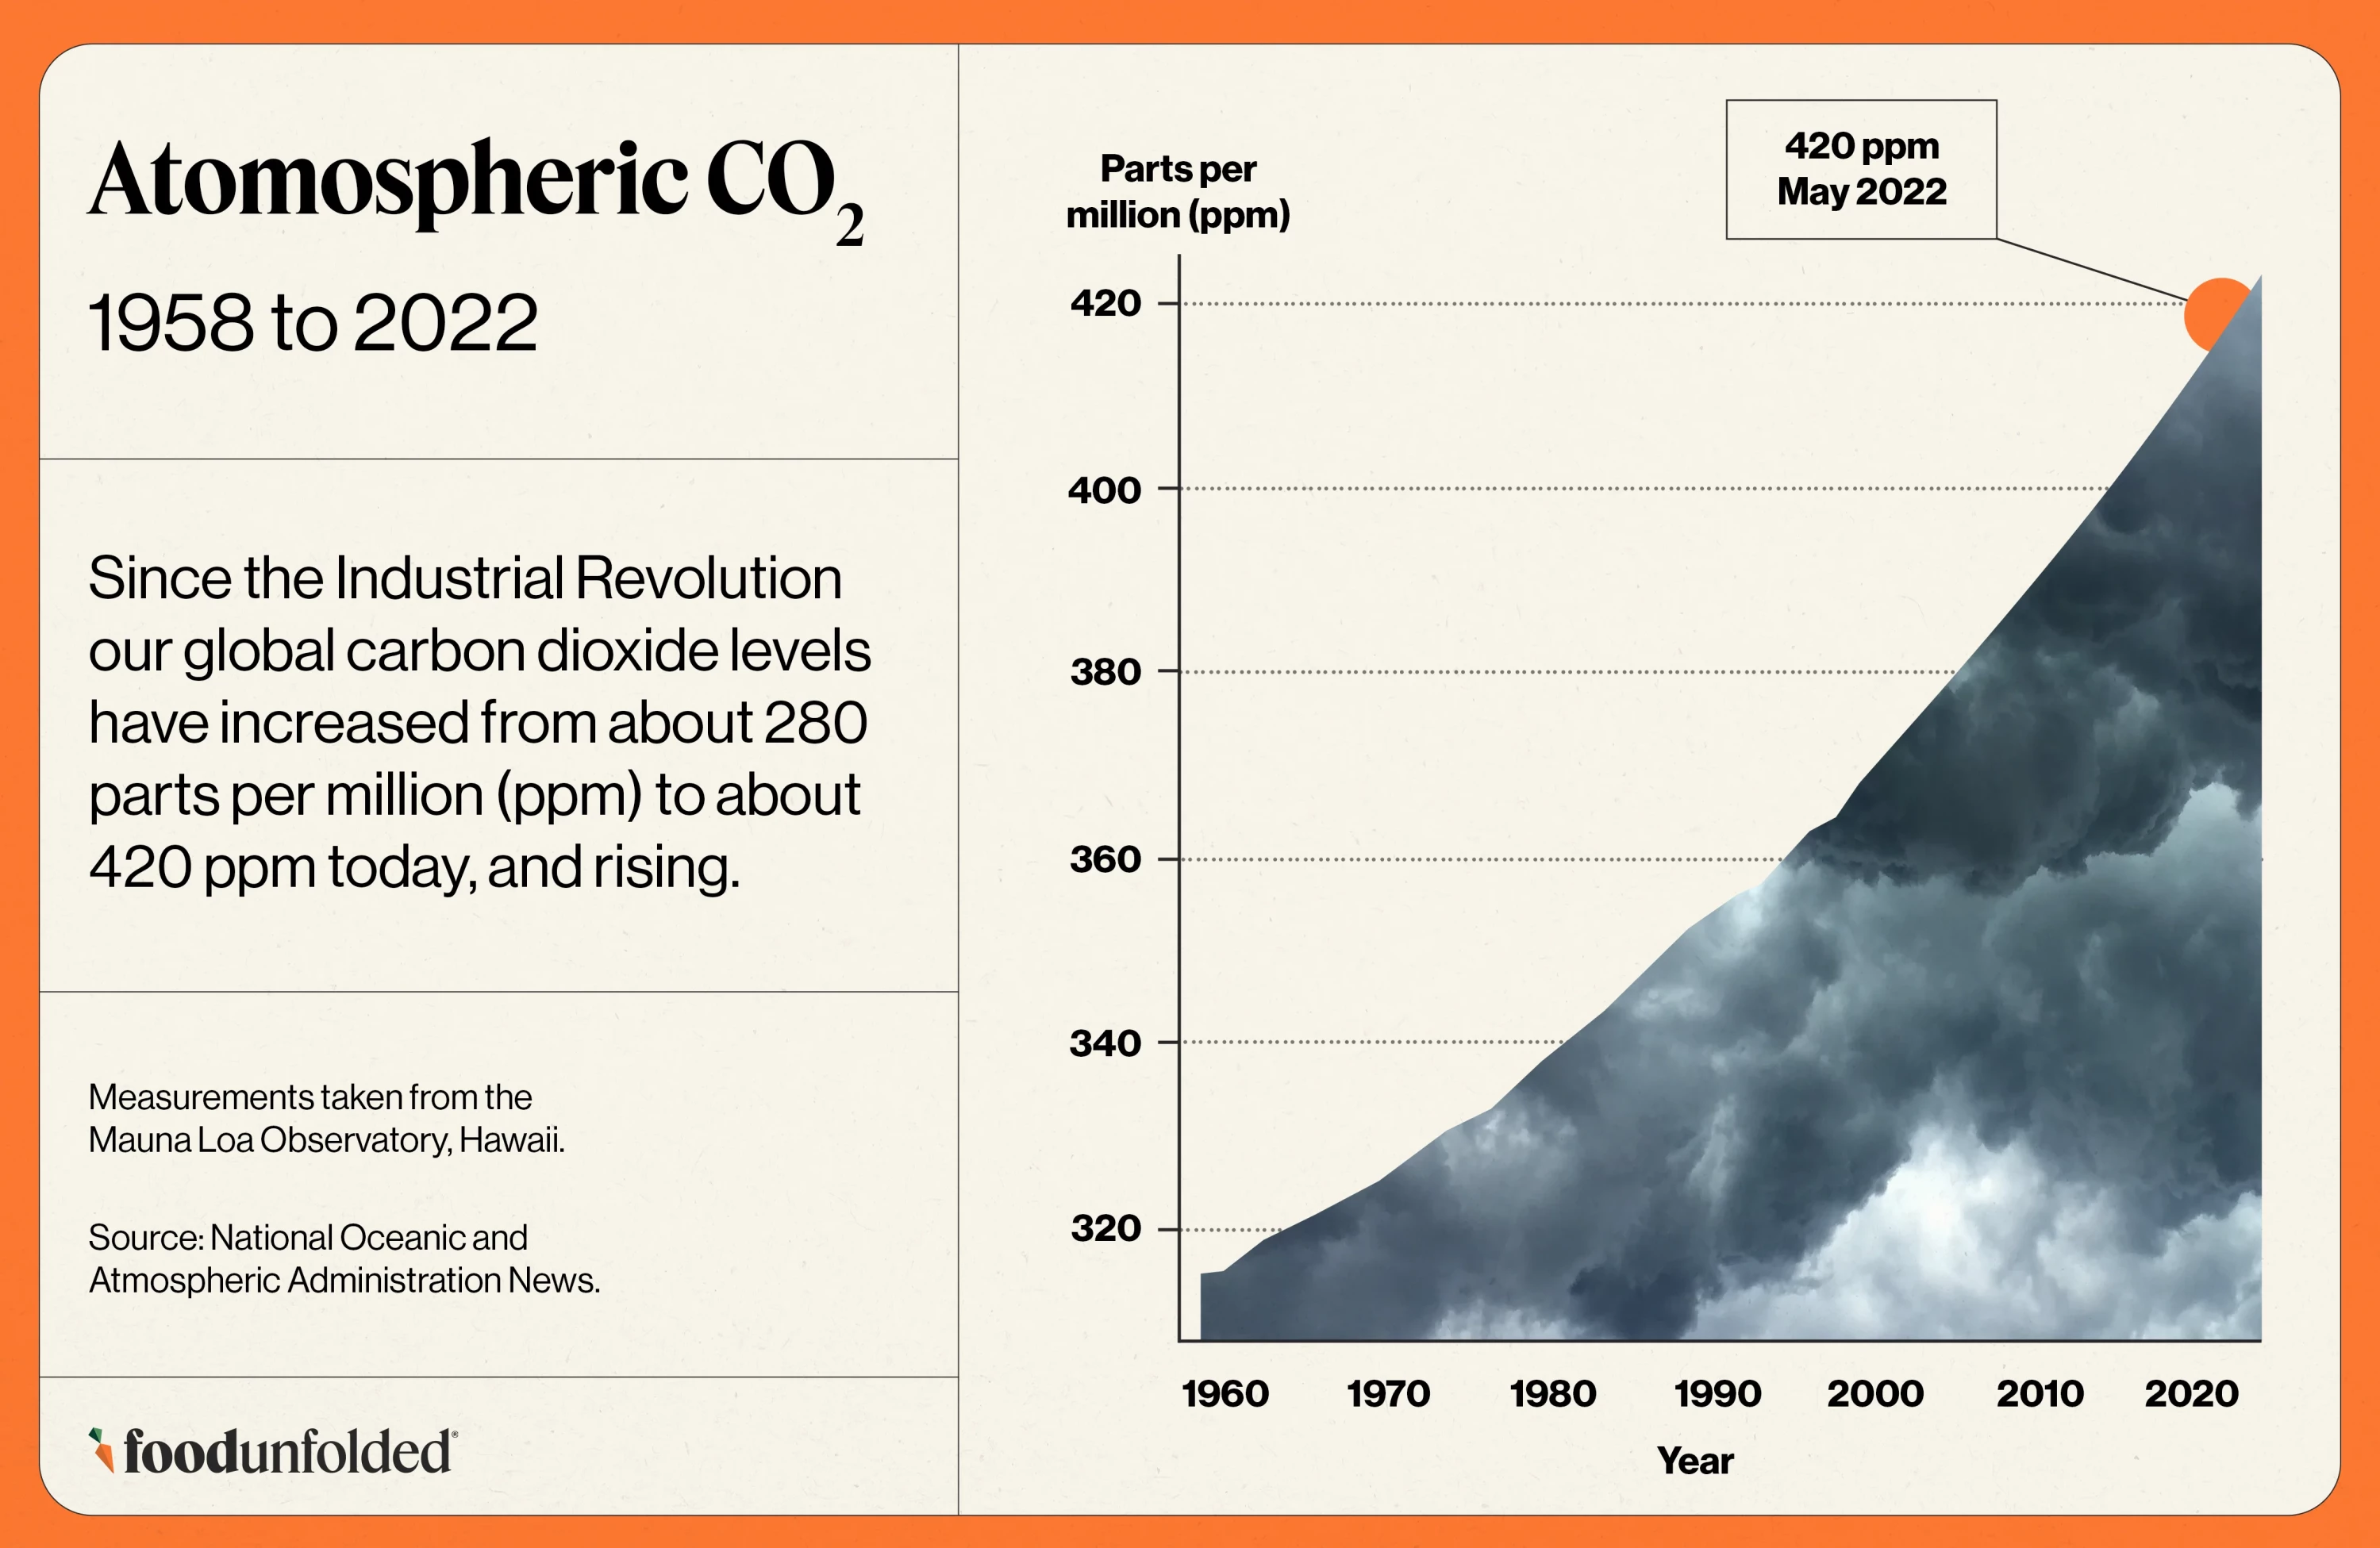 Since the Industrial Revolution our global carbon dioxide levels have increased from about 280 parts per million (ppm) to about 420 ppm today, and rising.5 These emissions are causing rapid climate destabilisation that affects how we produce food.